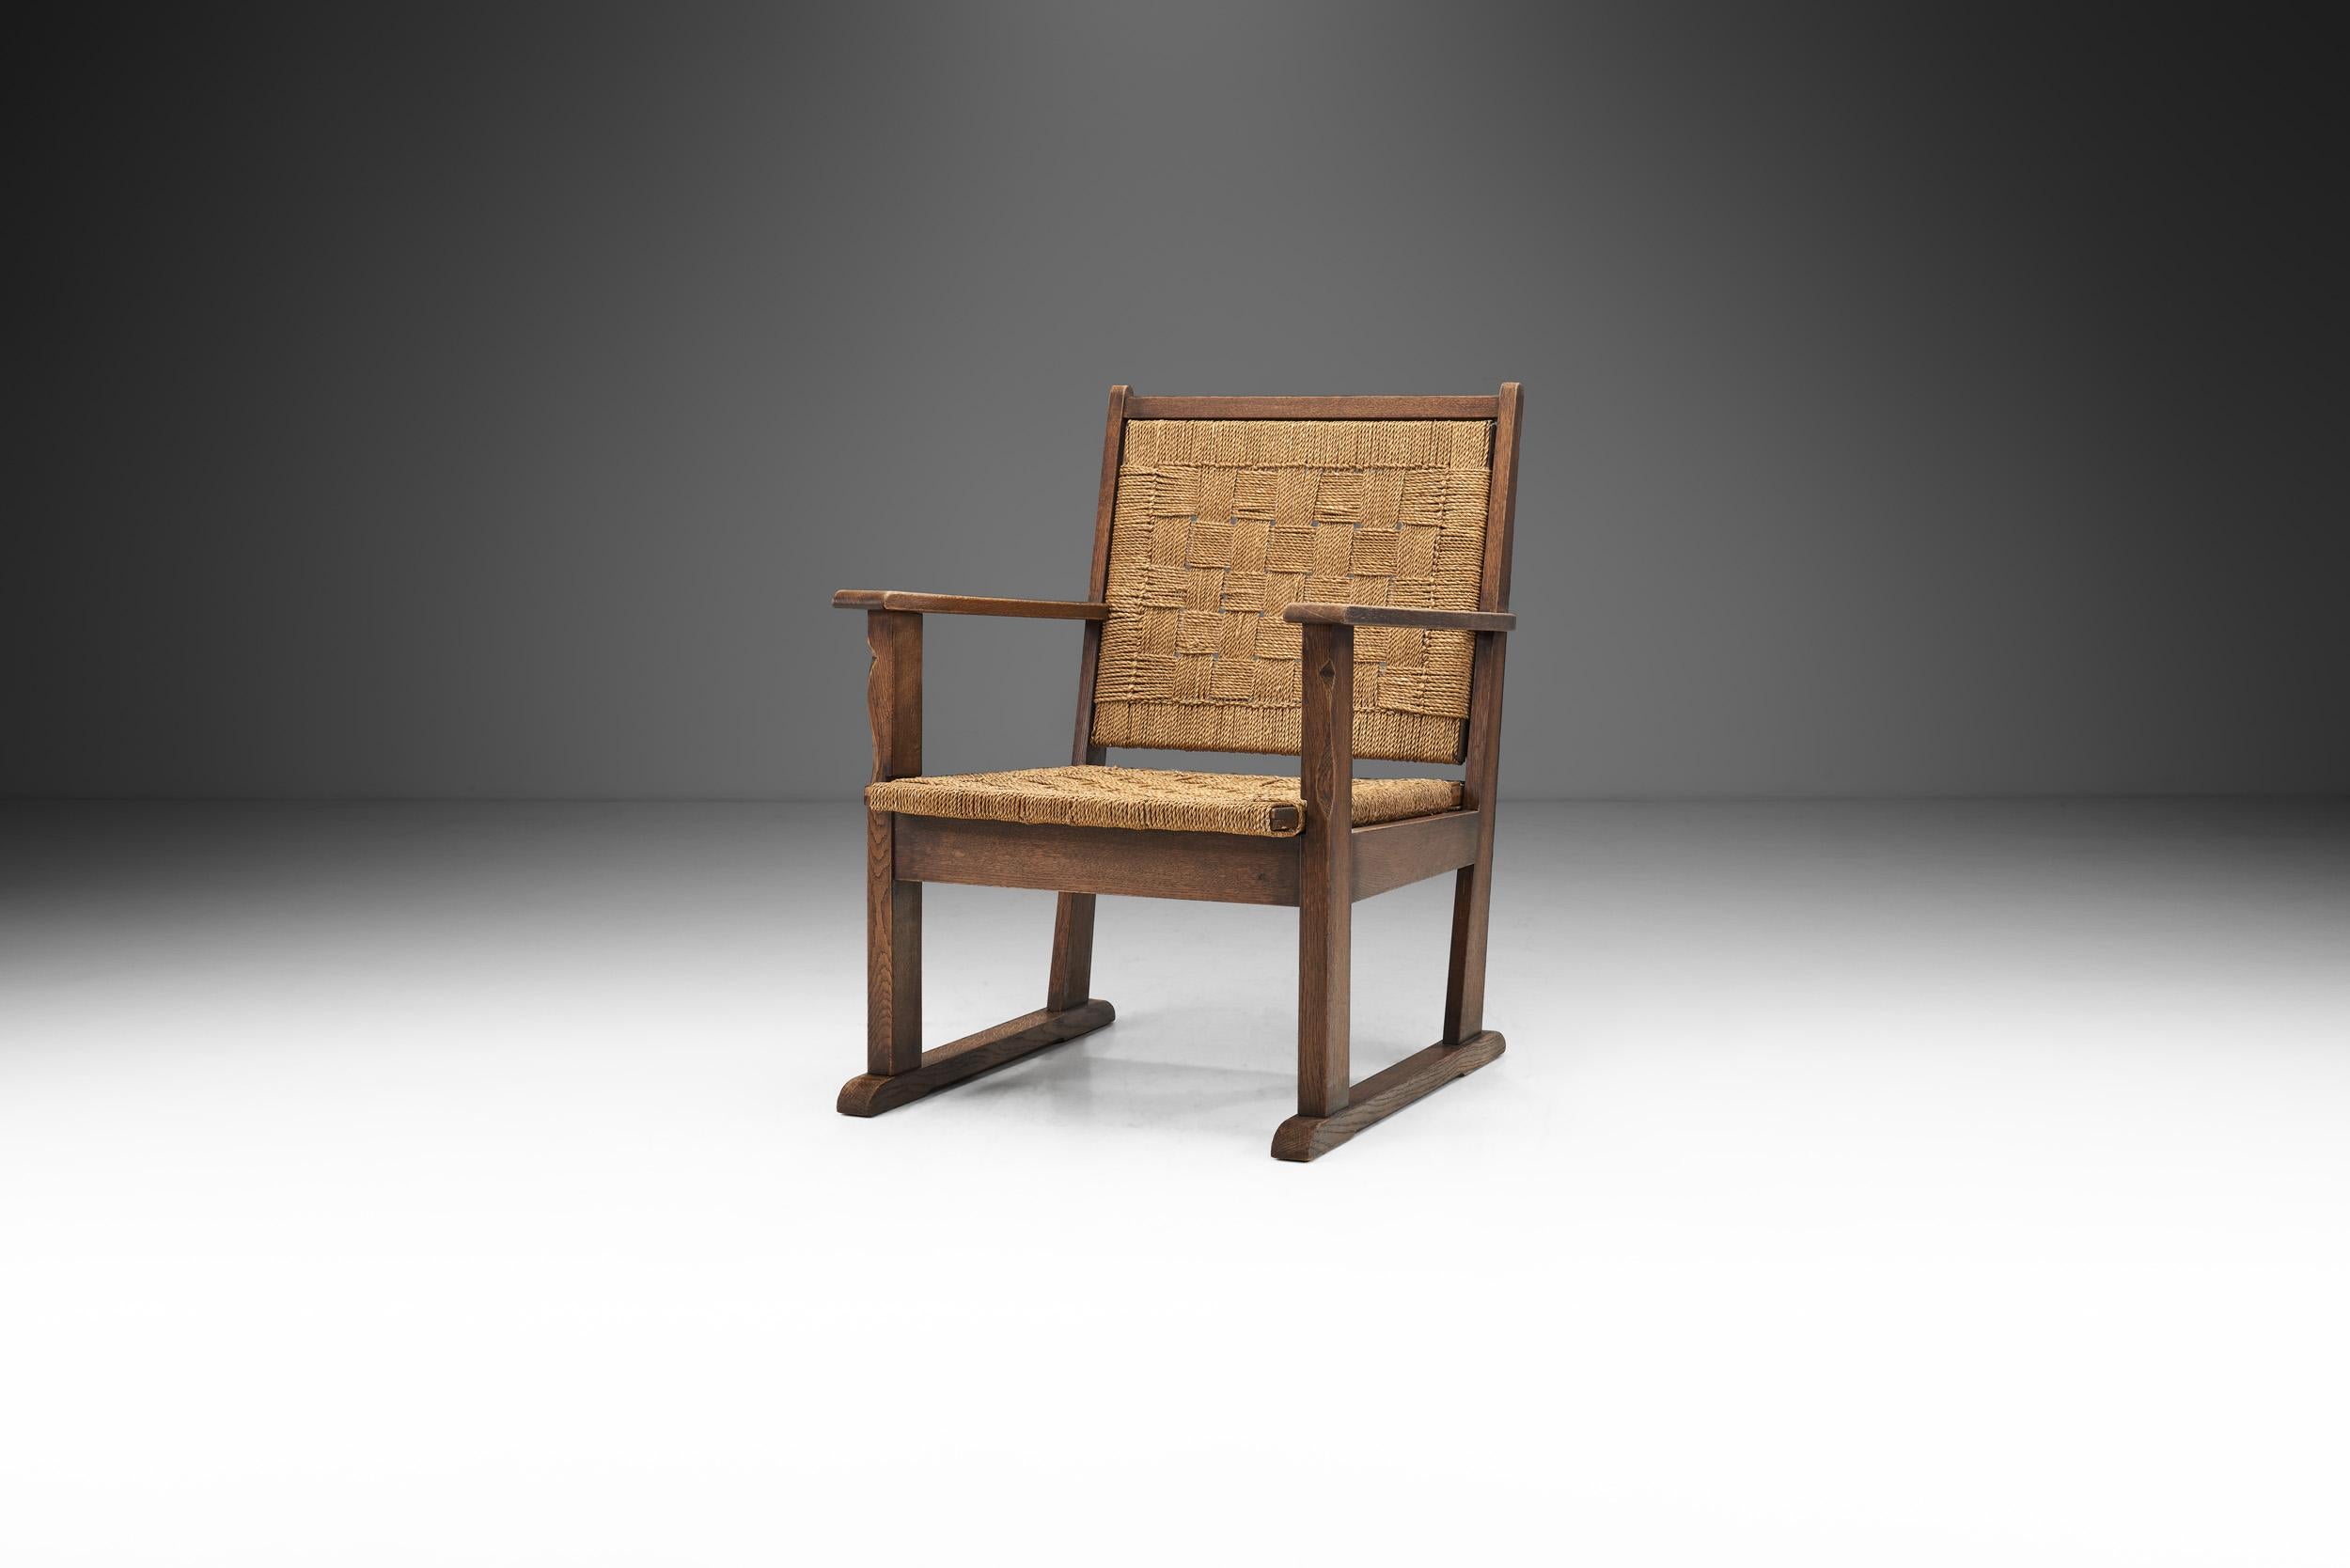 Bas van Pelt’s designs were only produced when an order was placed, which is still a tradition at “My Home Foundation” and explains the limited numbers of surviving models. This unique sled base armchair is one of these models, showing Bas van